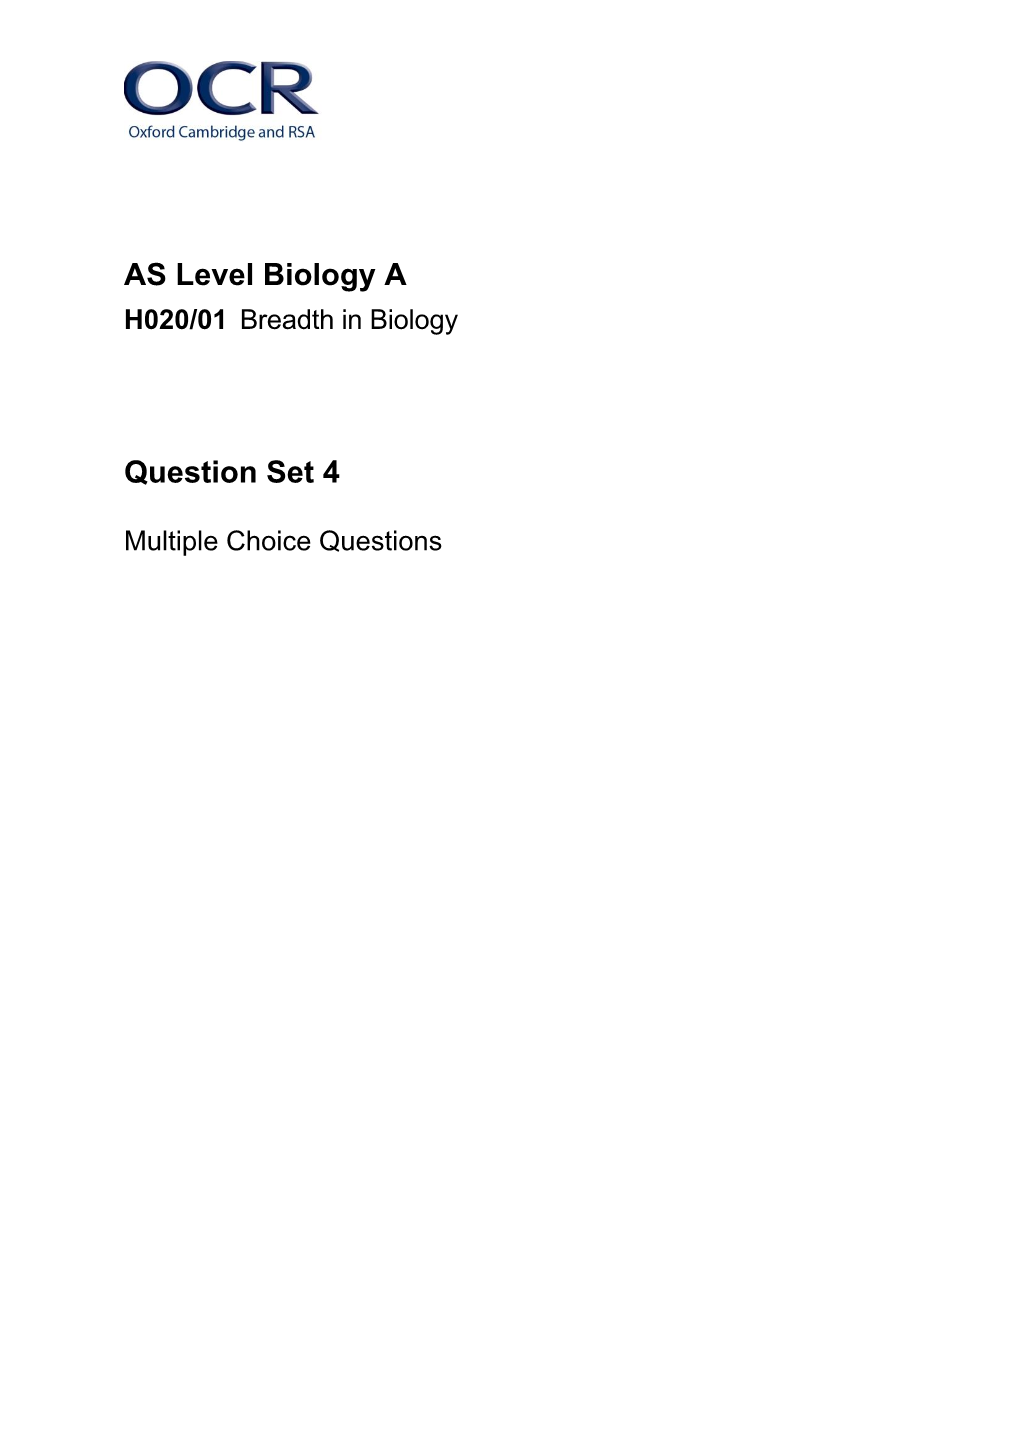 04. Biodiversity, Classification And